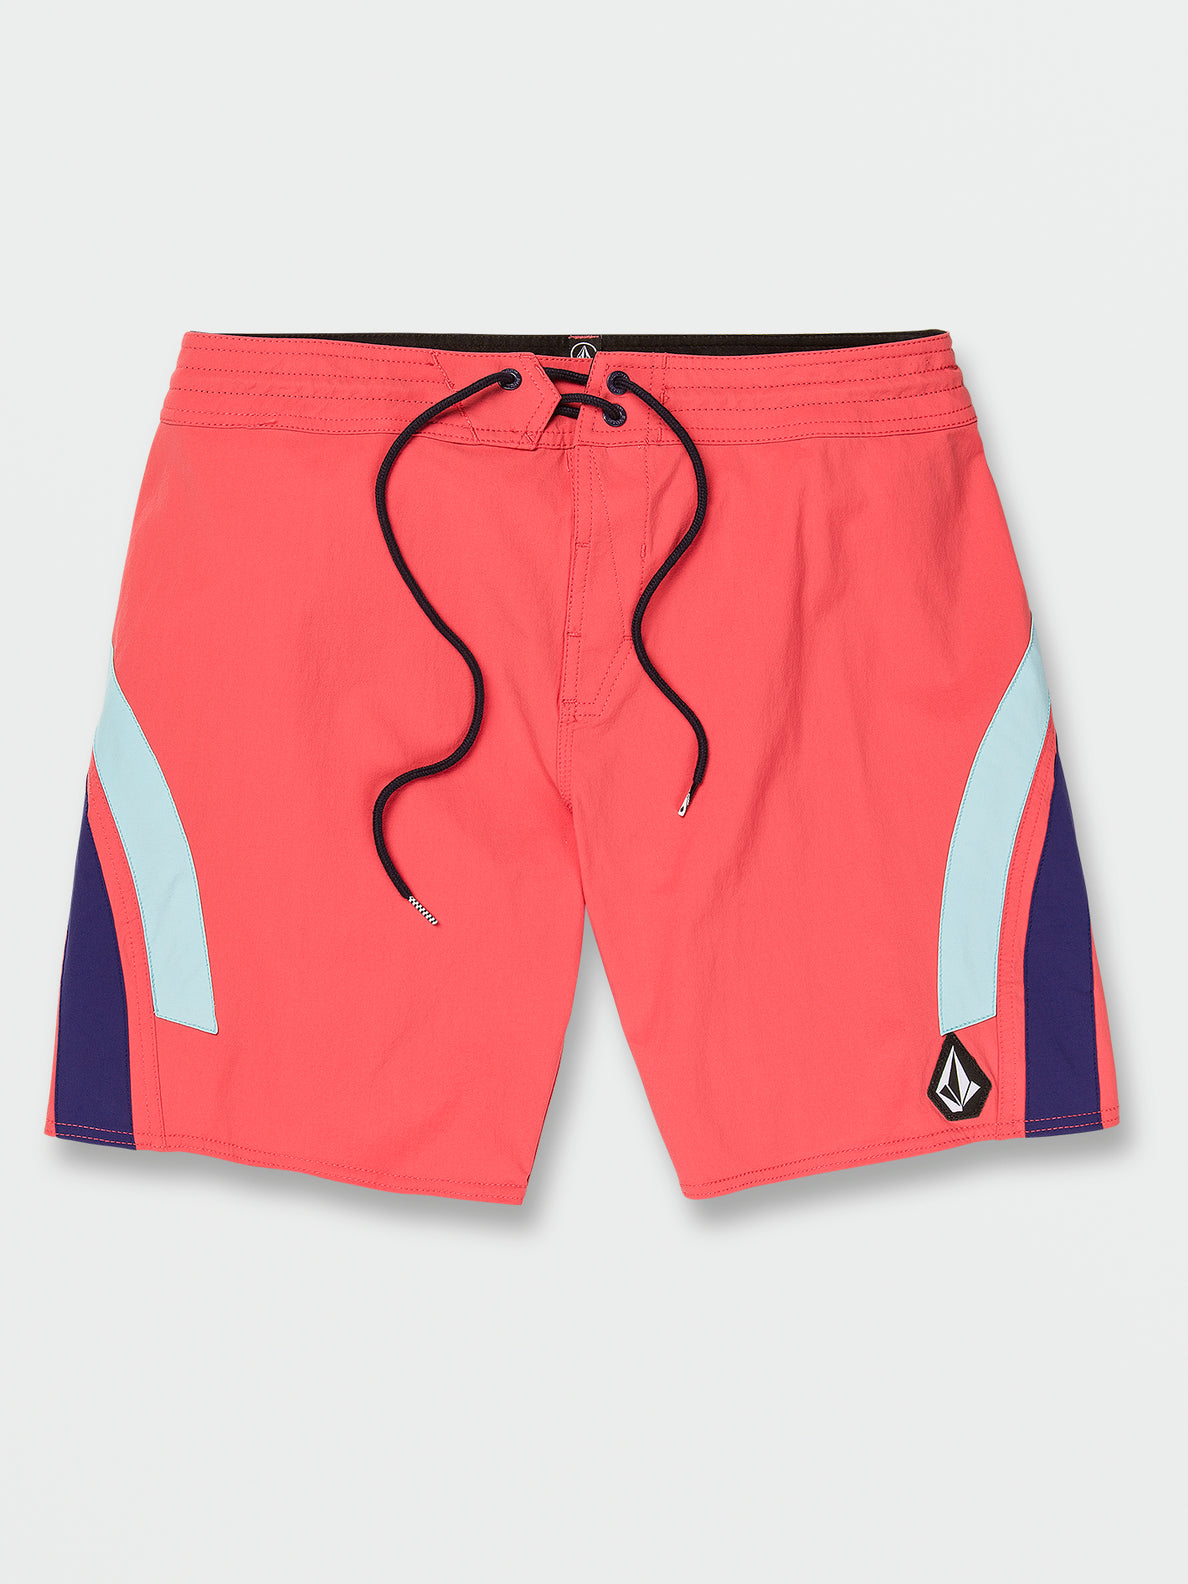 Arched Liberator Trunks - Cayenne (A0812205_CAY) [F]